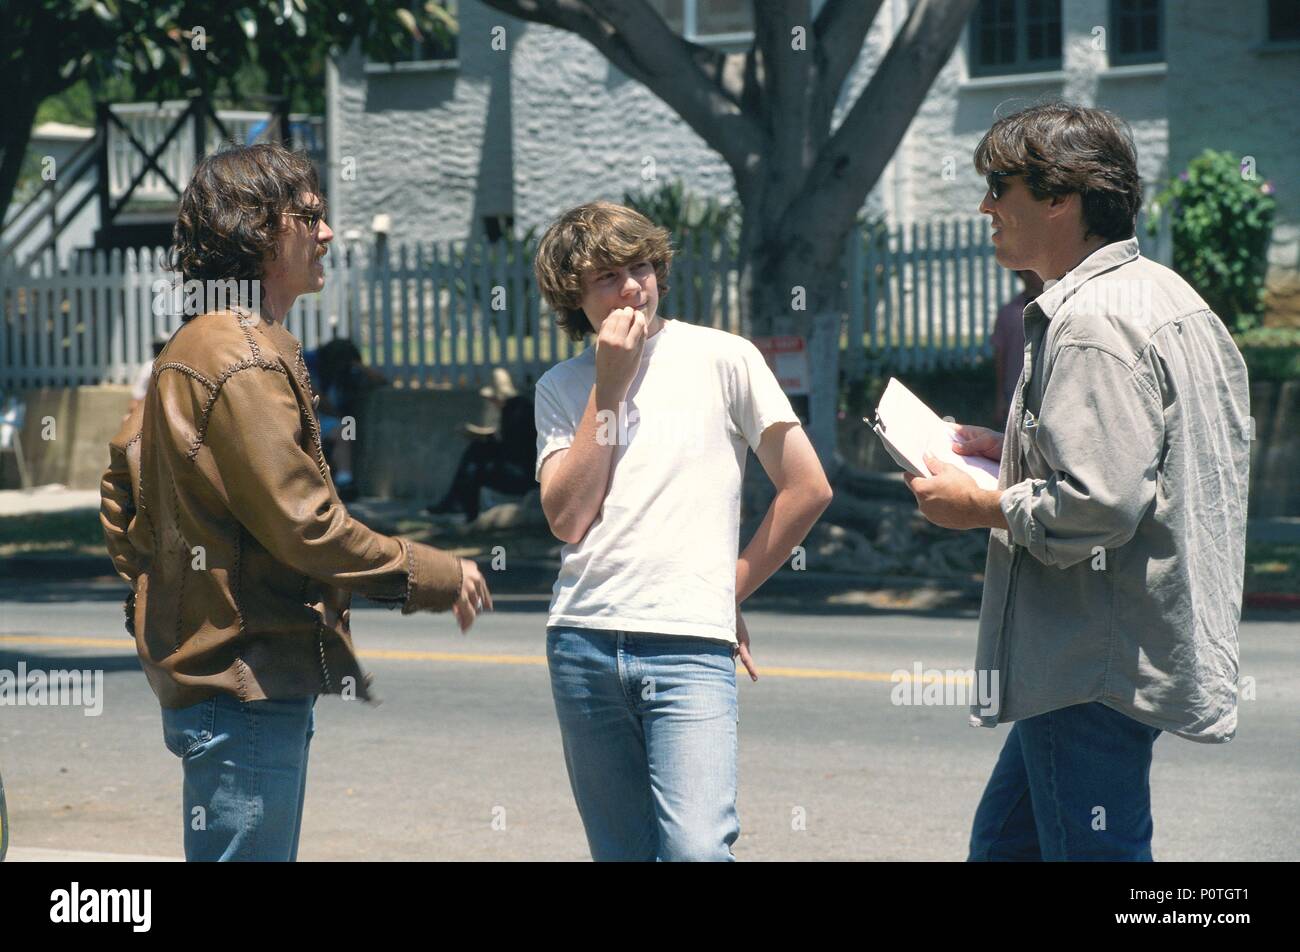 Original Film Title Almost Famous English Title Almost Famous Film Director Cameron Crowe